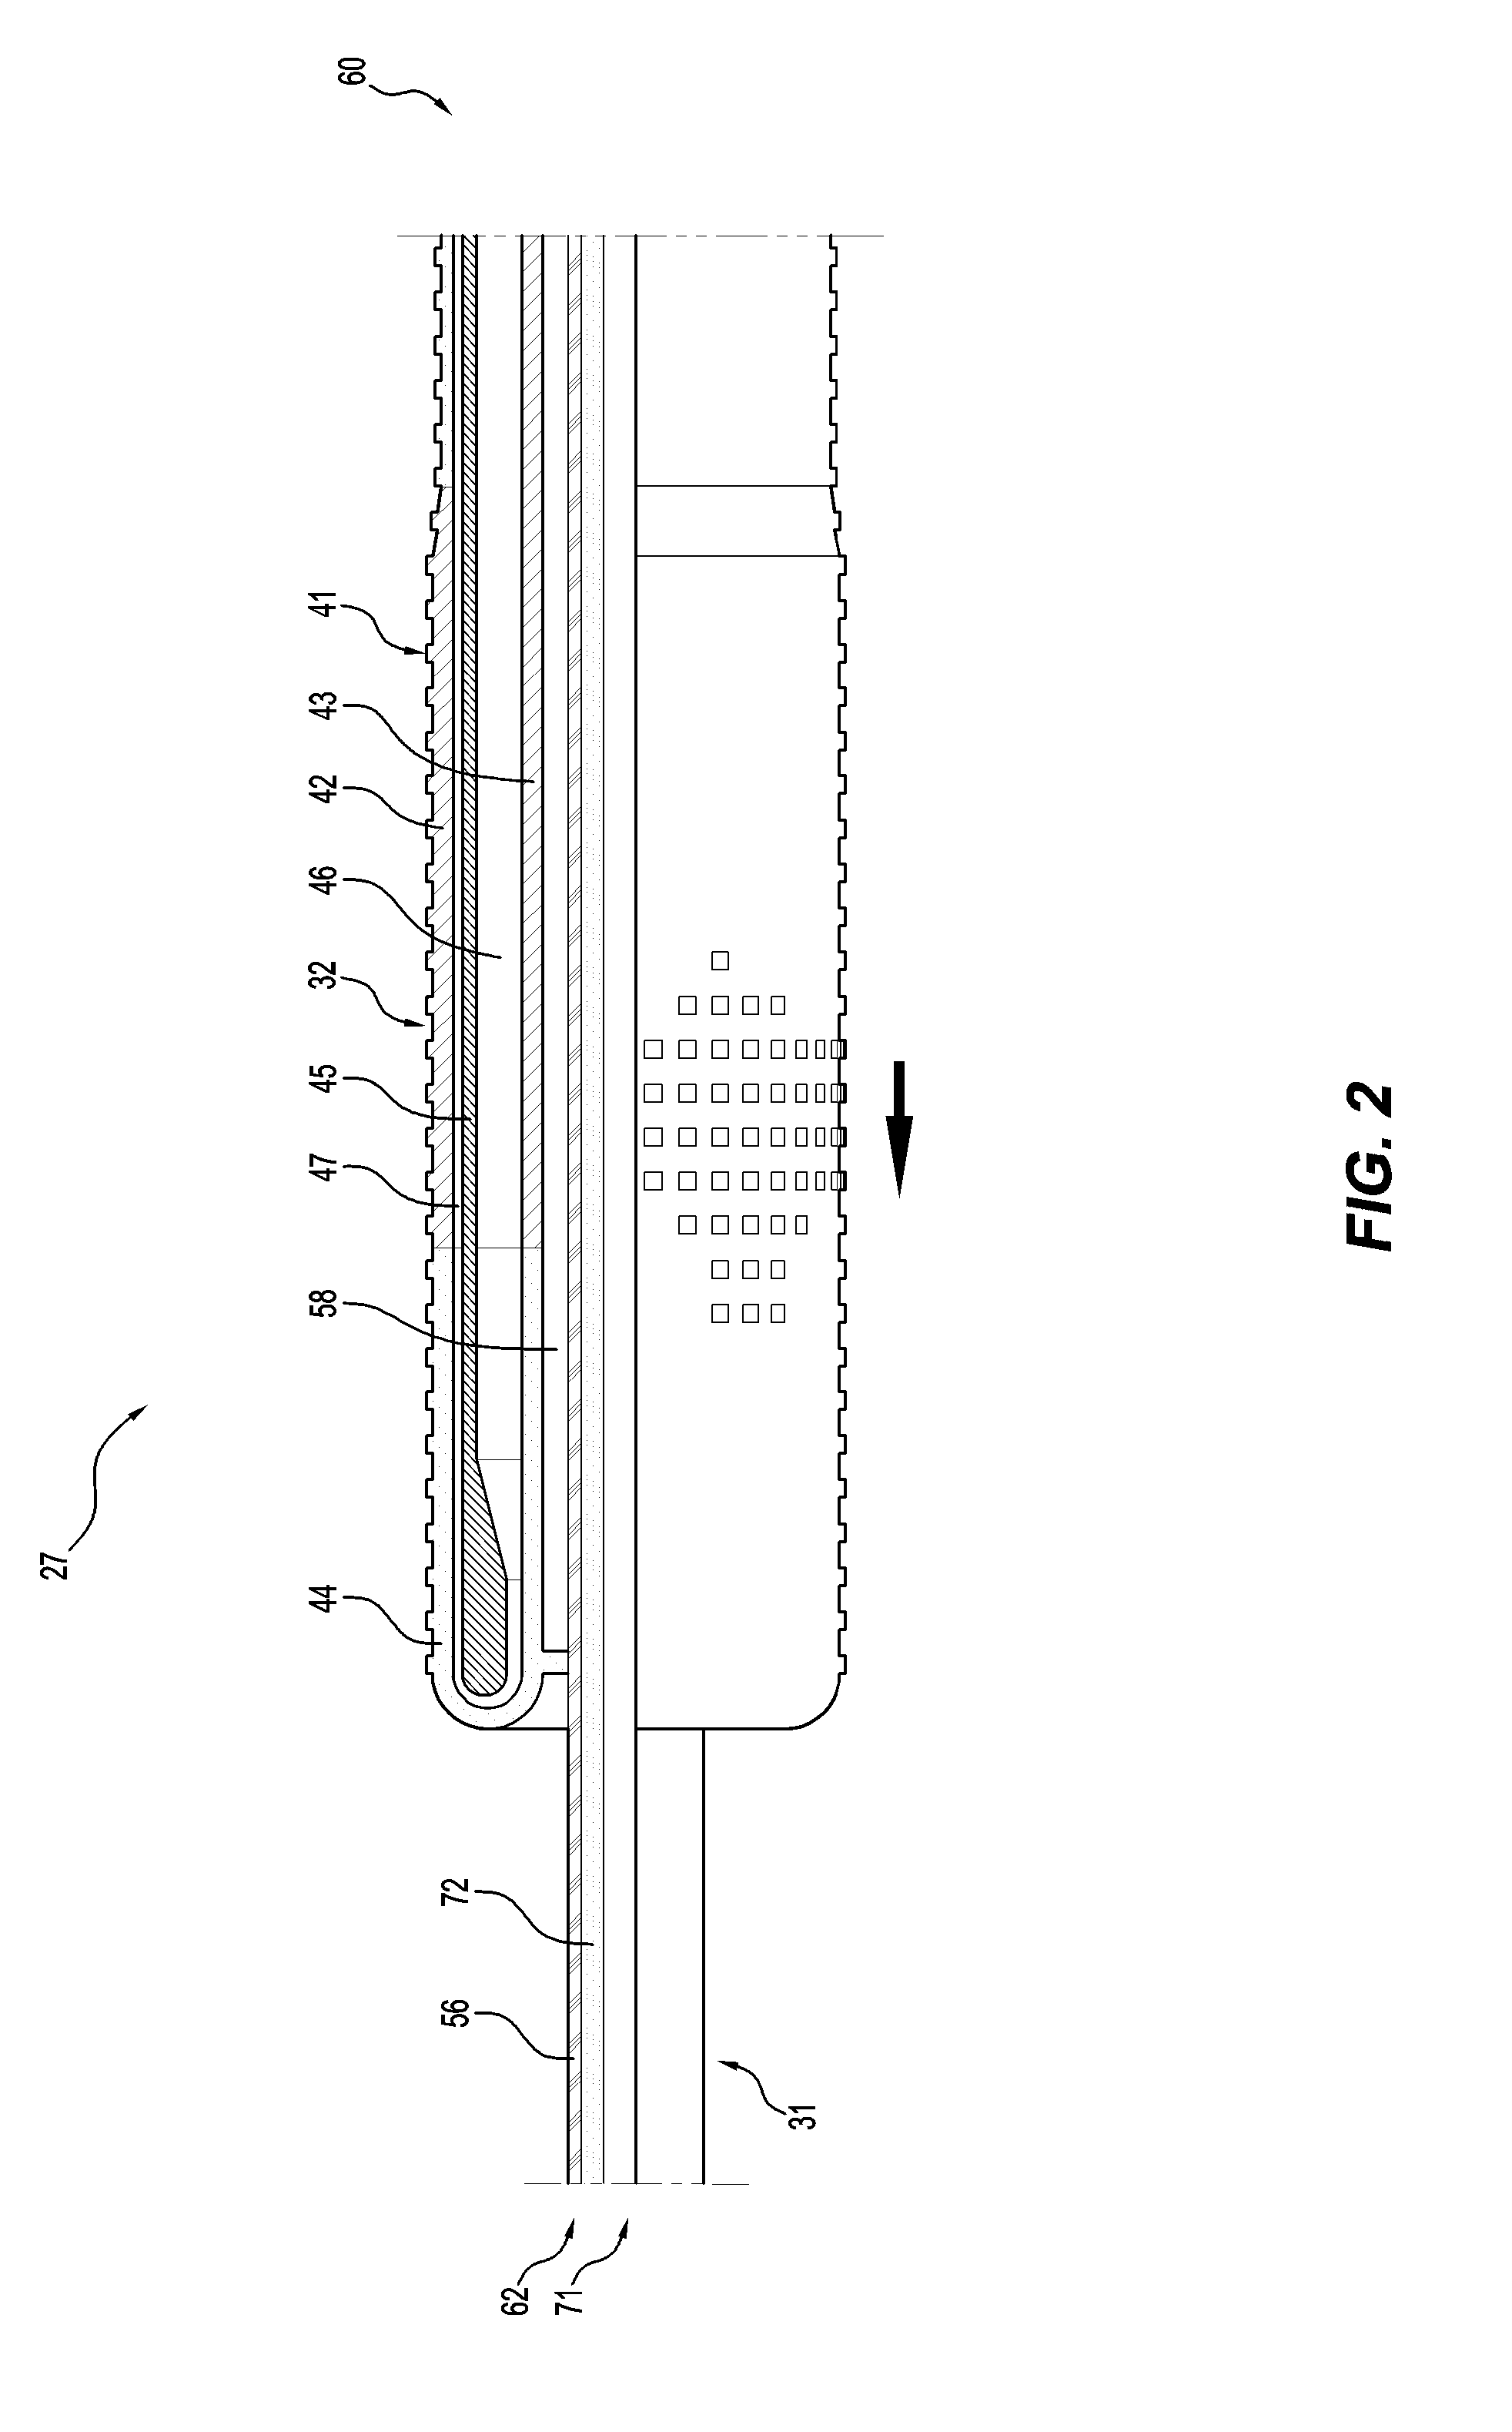 A solids injection lance